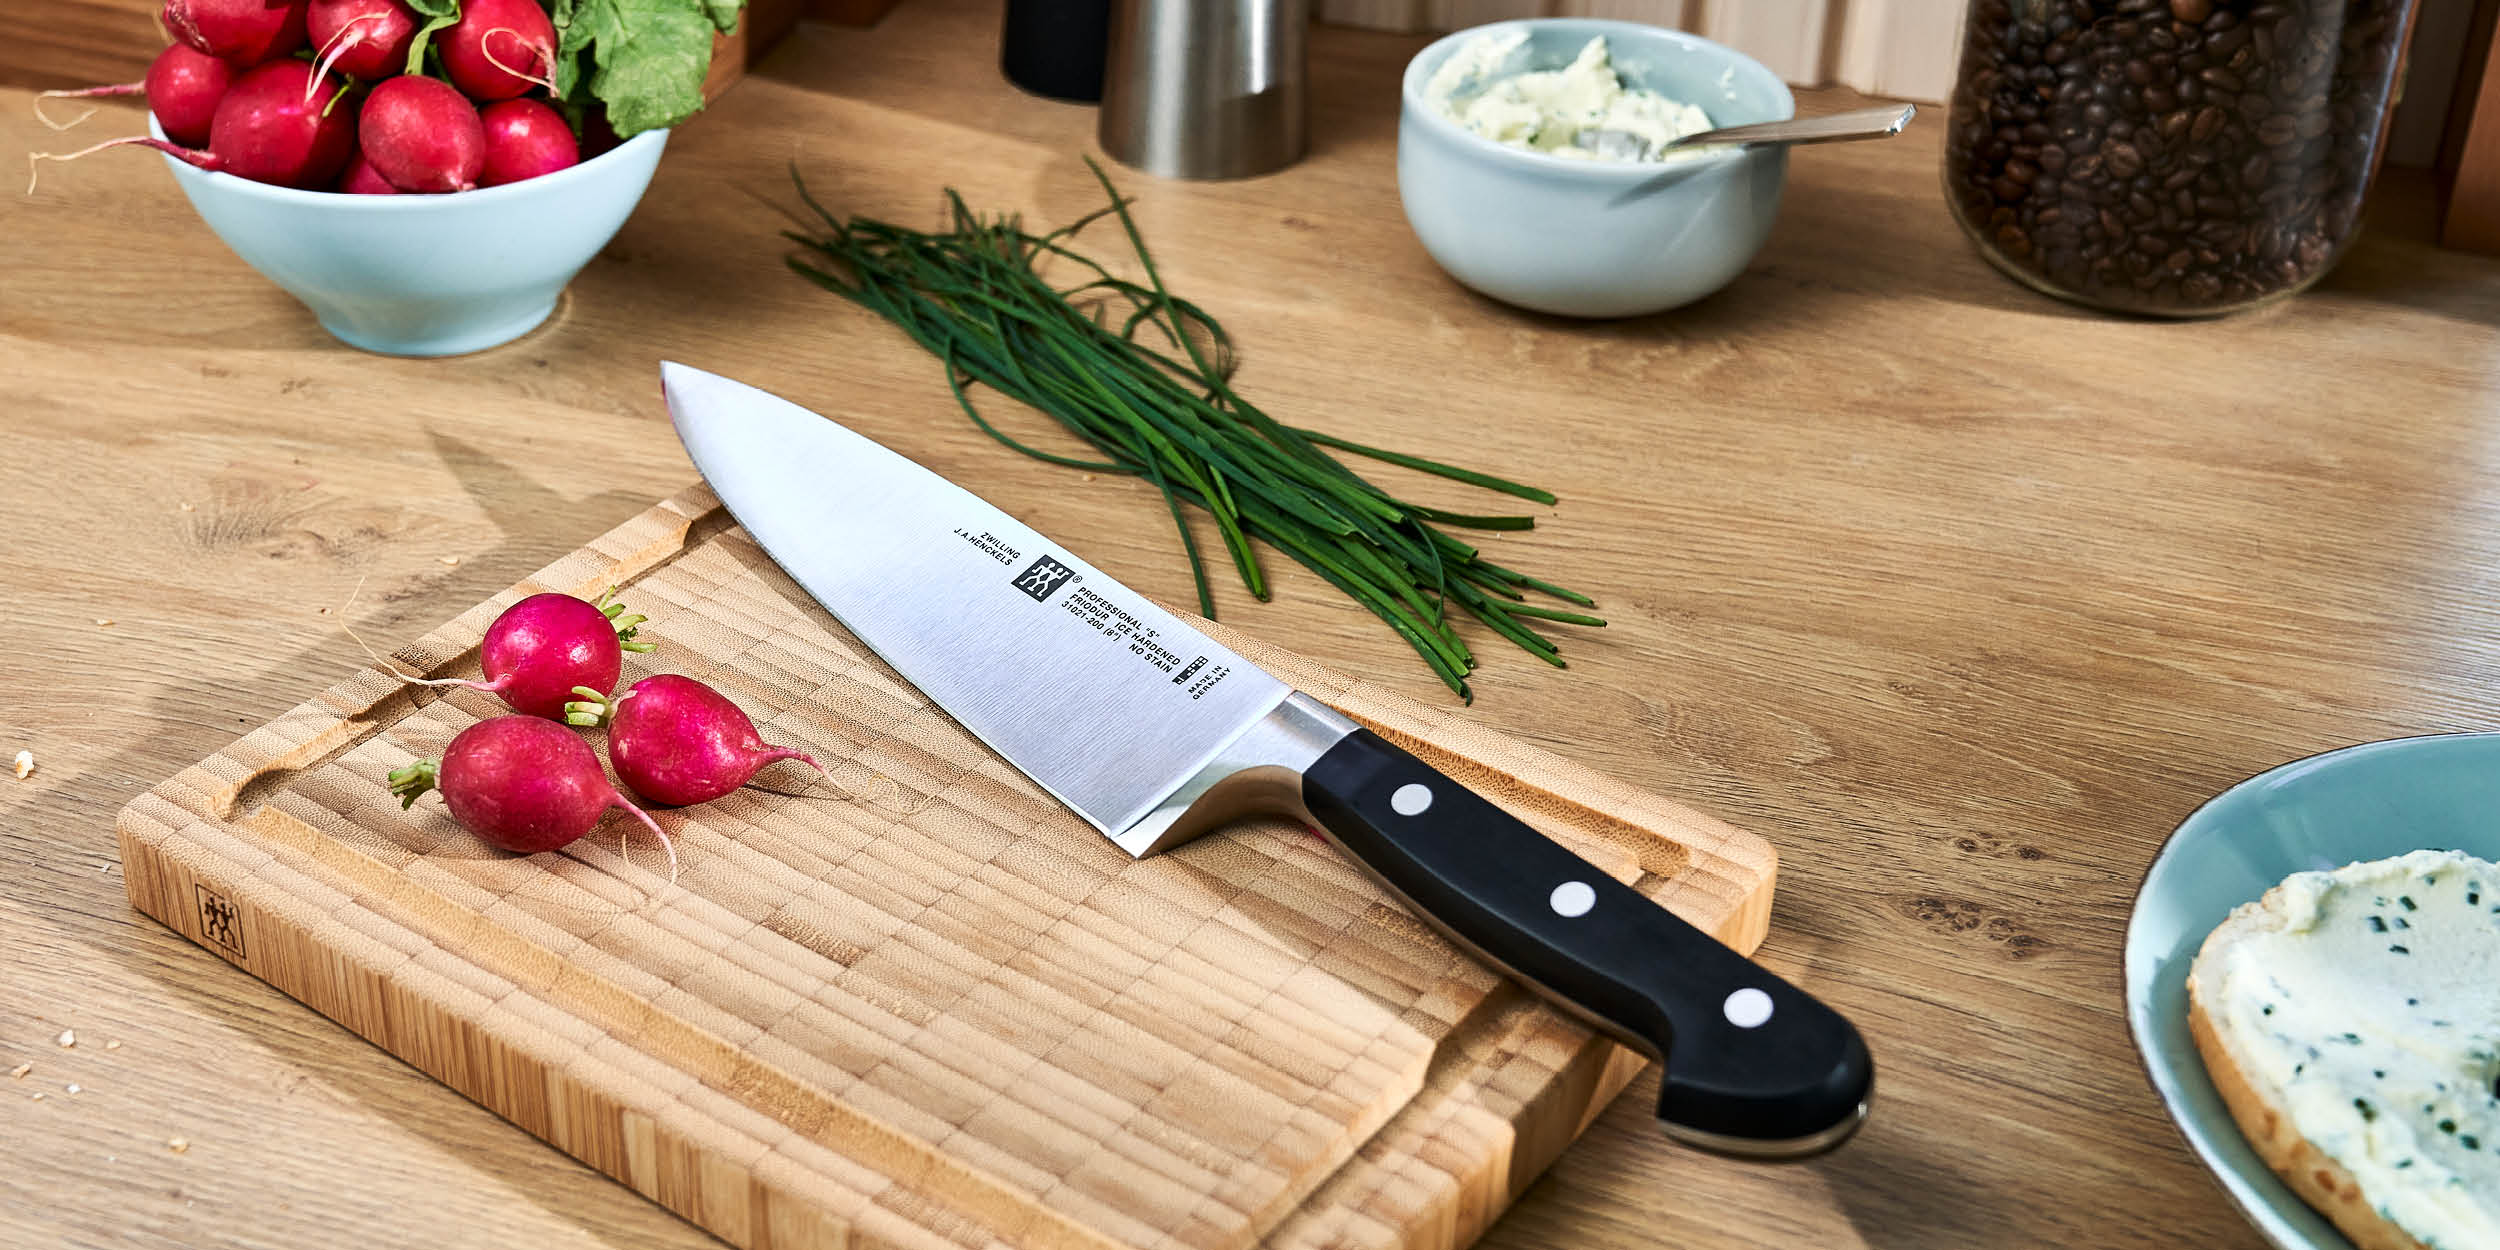 https://www.zwilling.com/on/demandware.static/-/Sites-zwilling-ca-Library/default/dwf86b2e31/images/product-content/masonry-content/zwilling/cutlery/professional-s/31021-201-0_Lifestyle_Image_Series_OS_1200x600.jpg